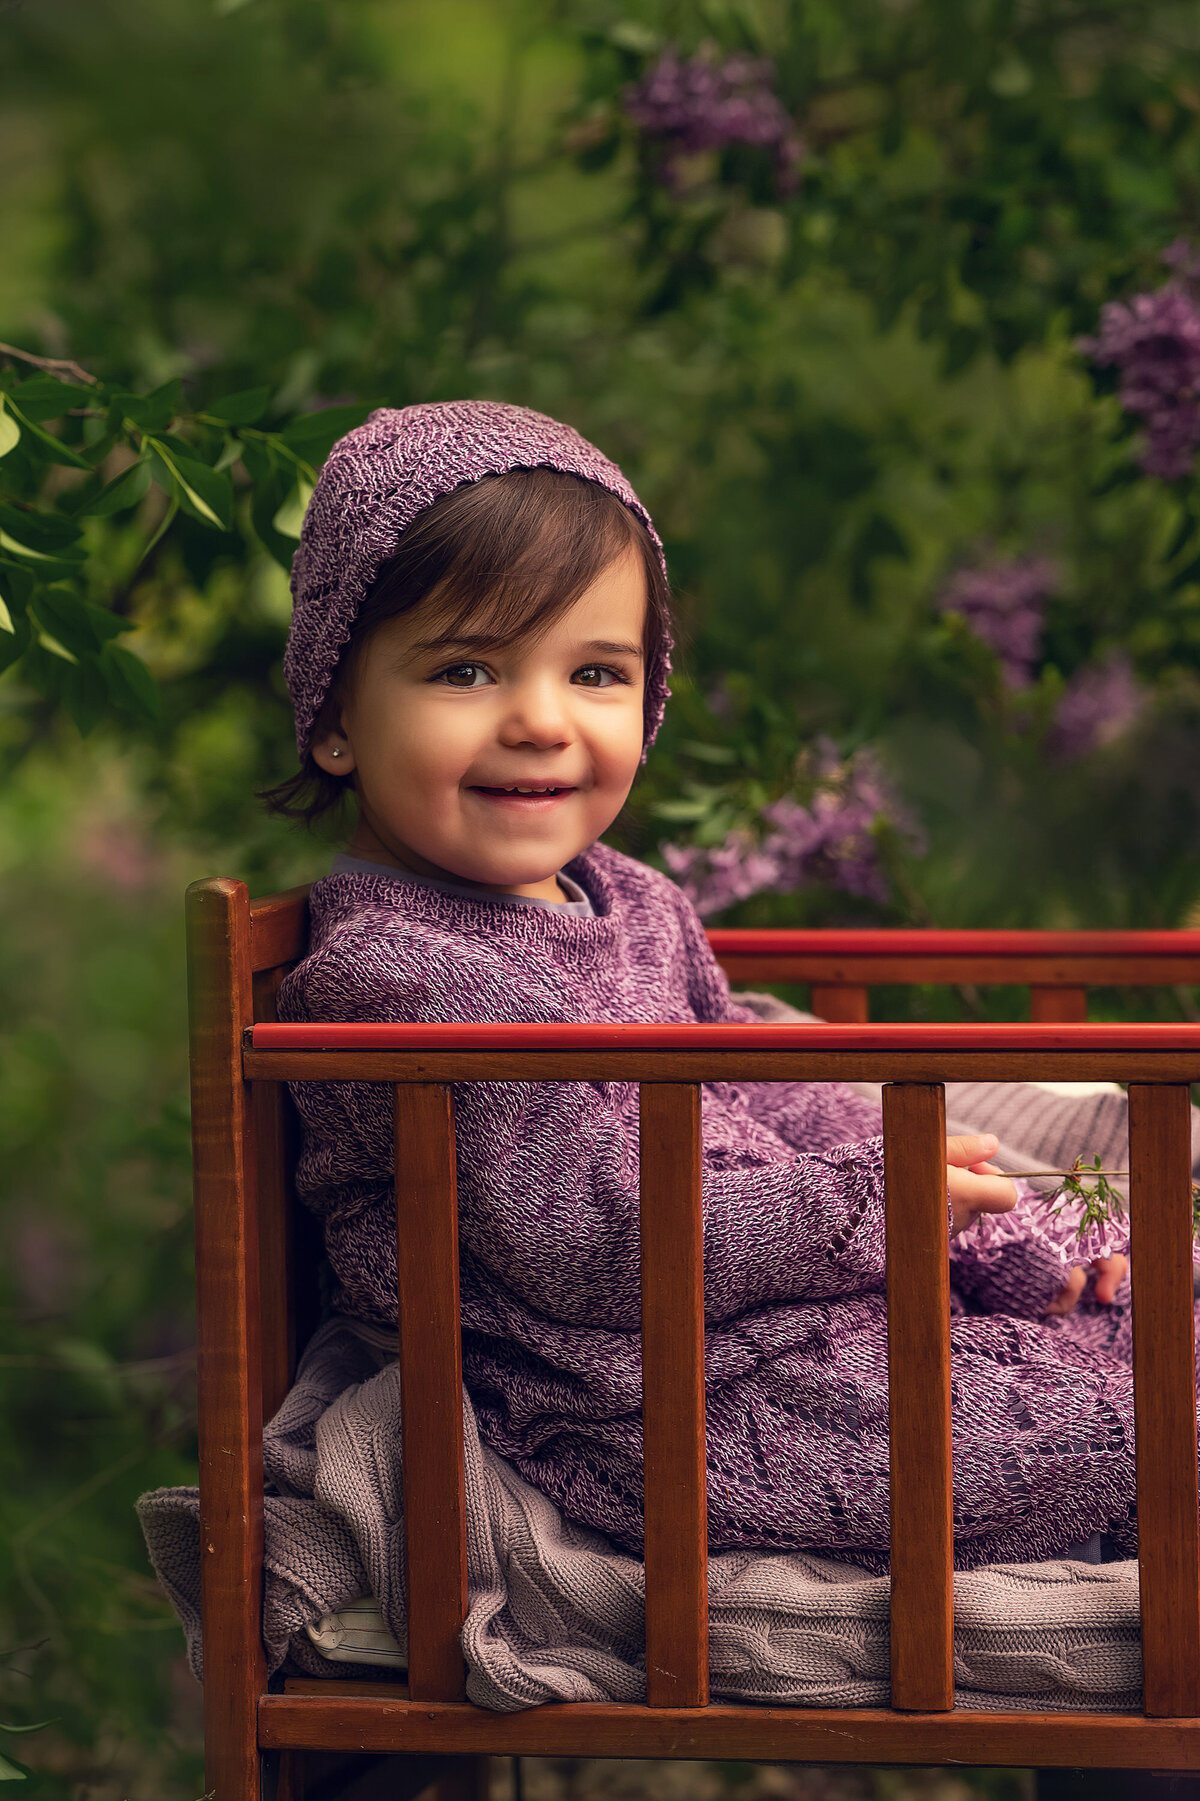 A young child sits outdoors in vintage crib surrounded by purple flowers for a whimsical, stylized portrait.